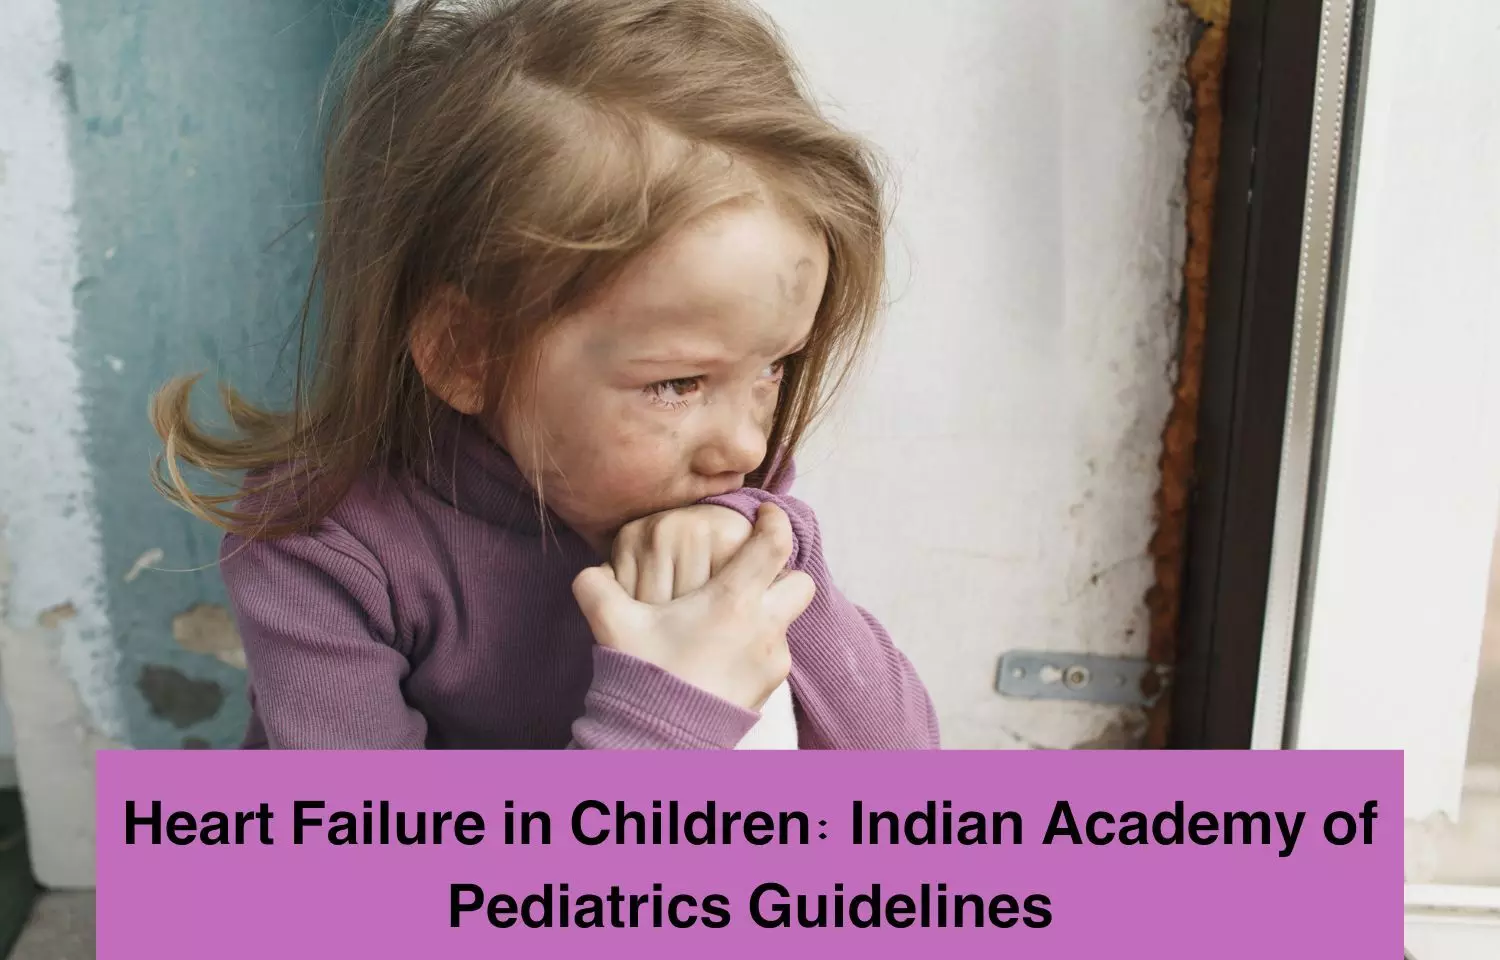 Heart Failure in Children: Indian Academy of Pediatrics Guidelines